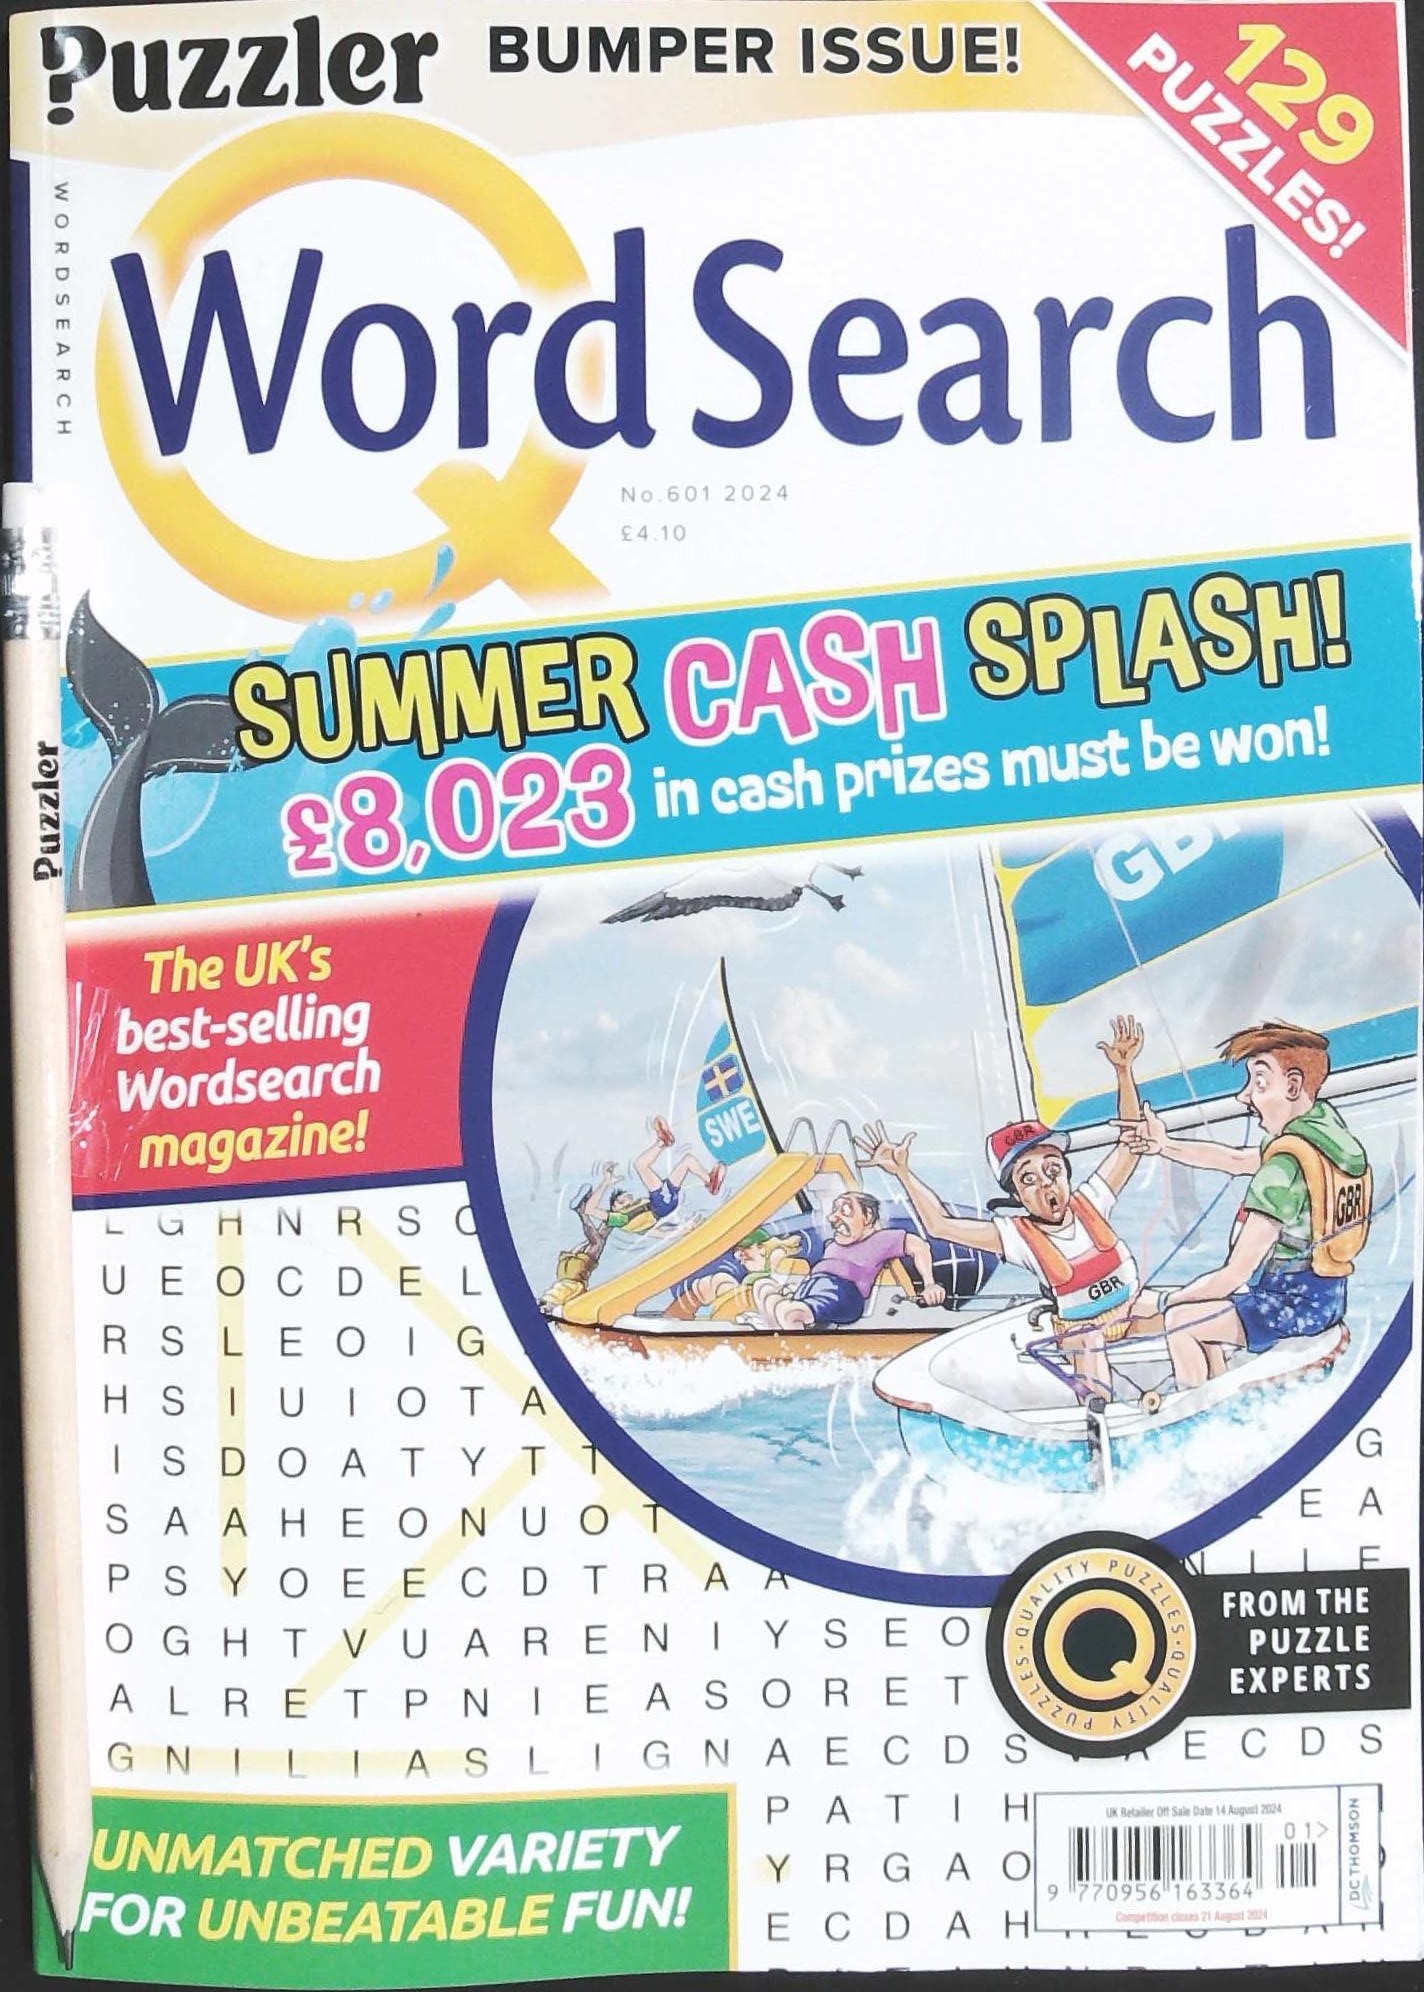 PUZZLER Q WORDSEARCH